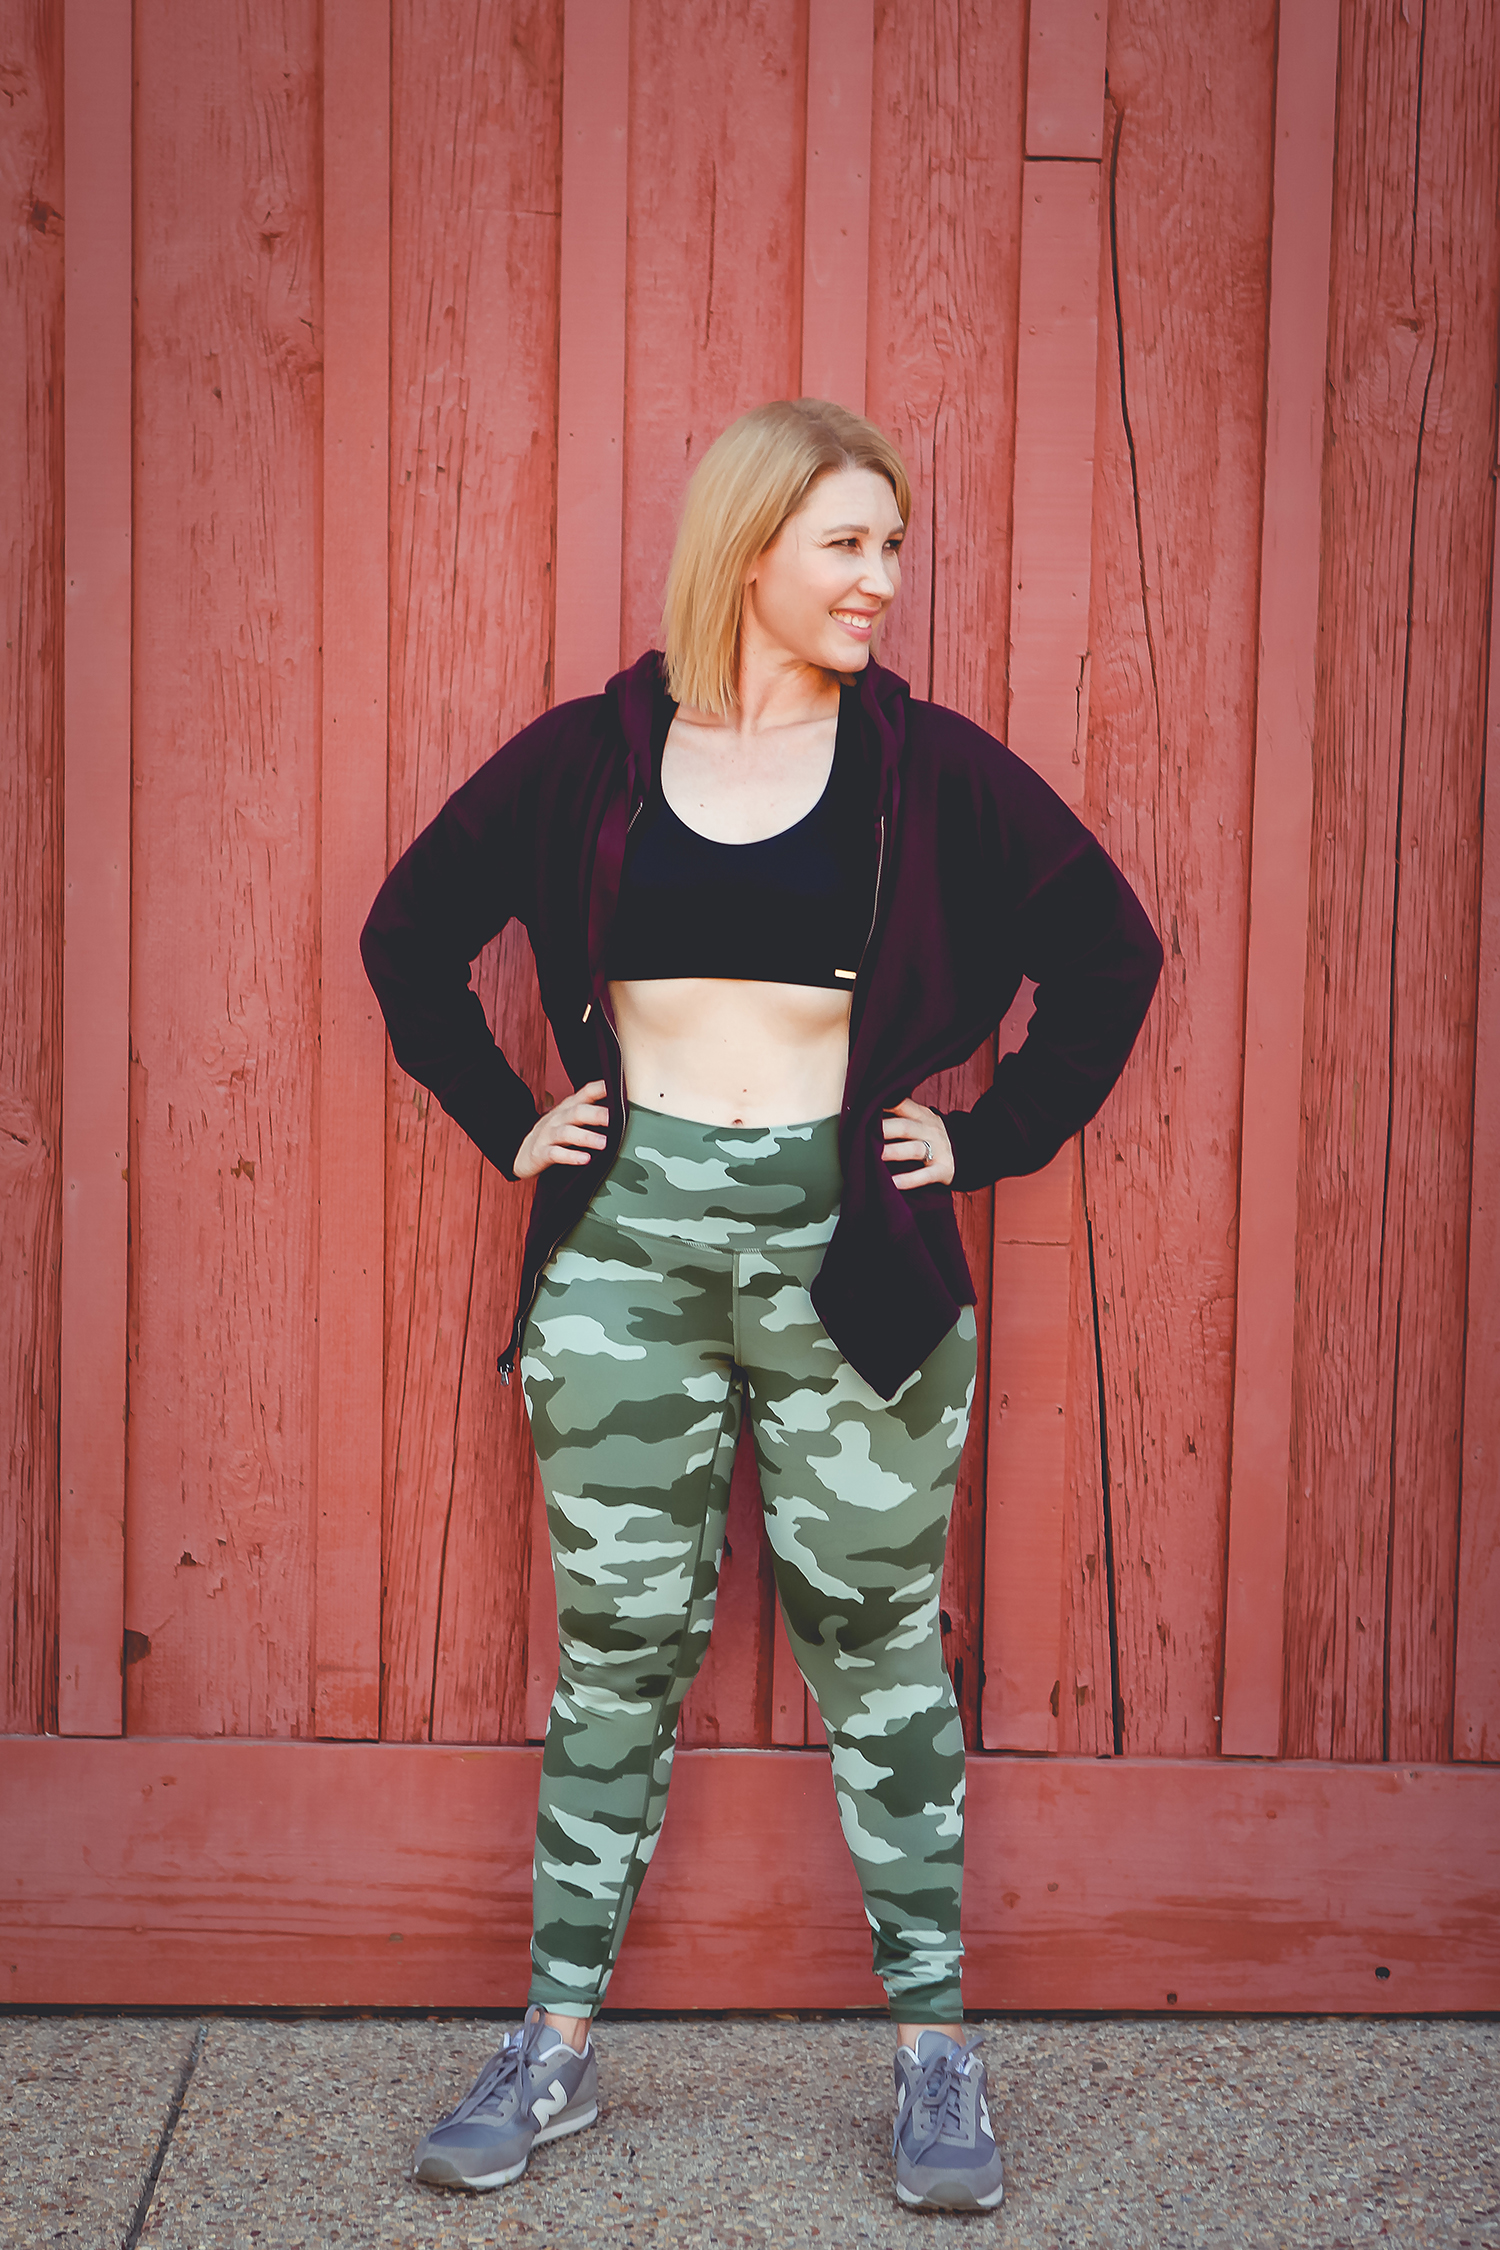 Are you looking for a little body positivity inspiration? This blogger gets real about why she DOESN'T want to lose weight.